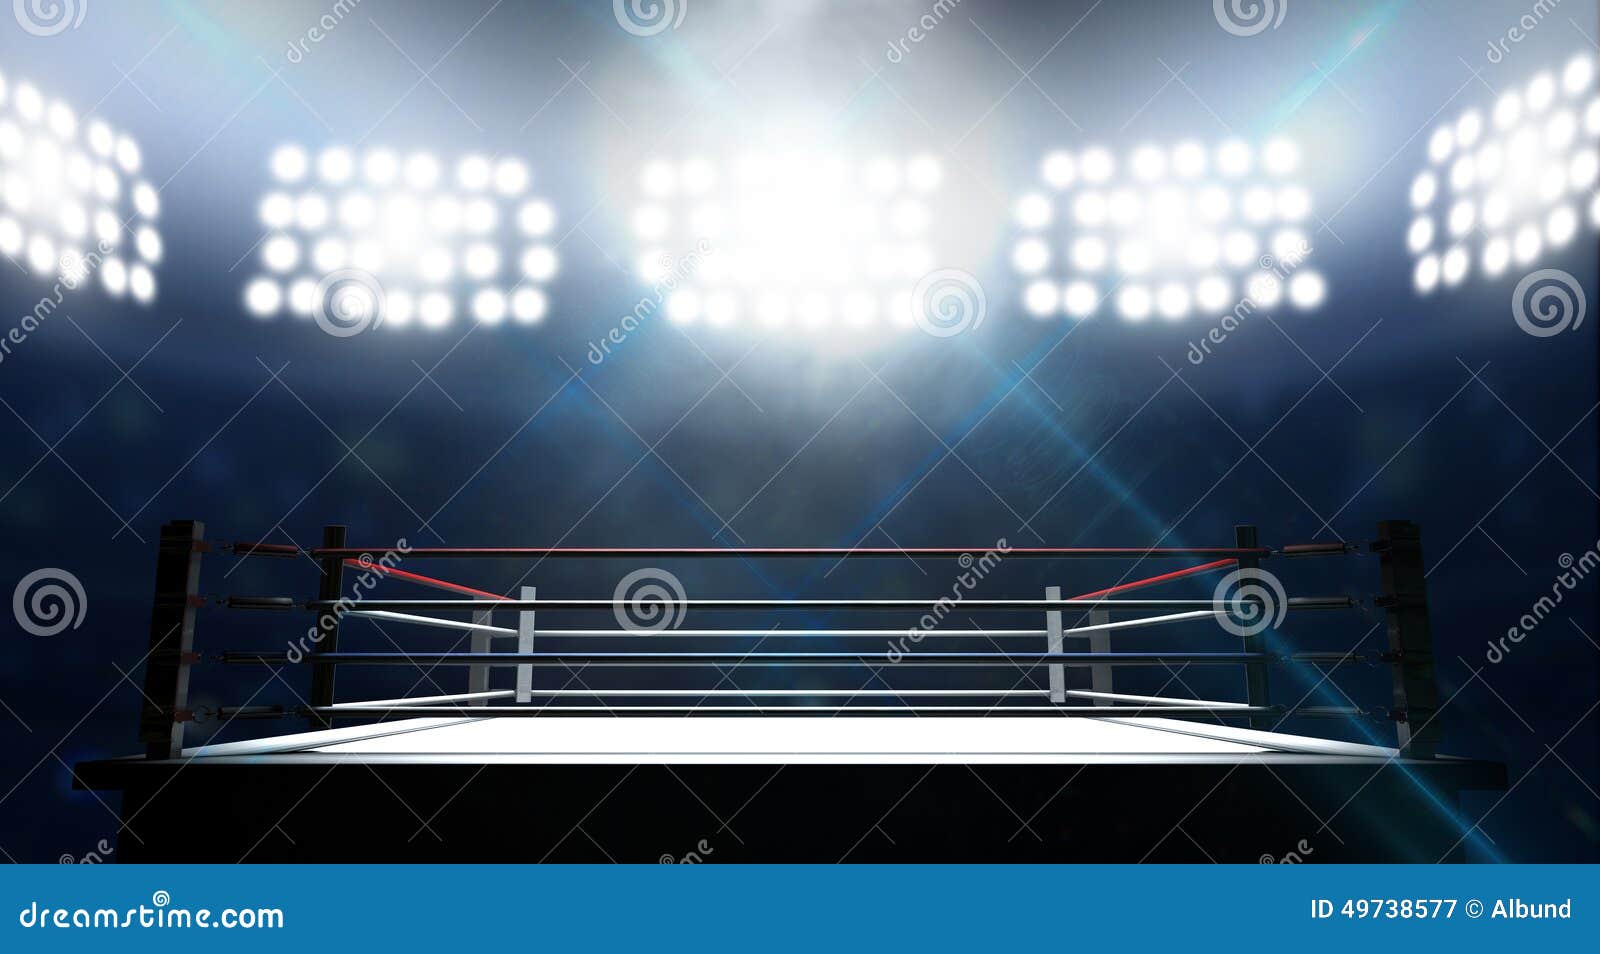 boxing ring in arena